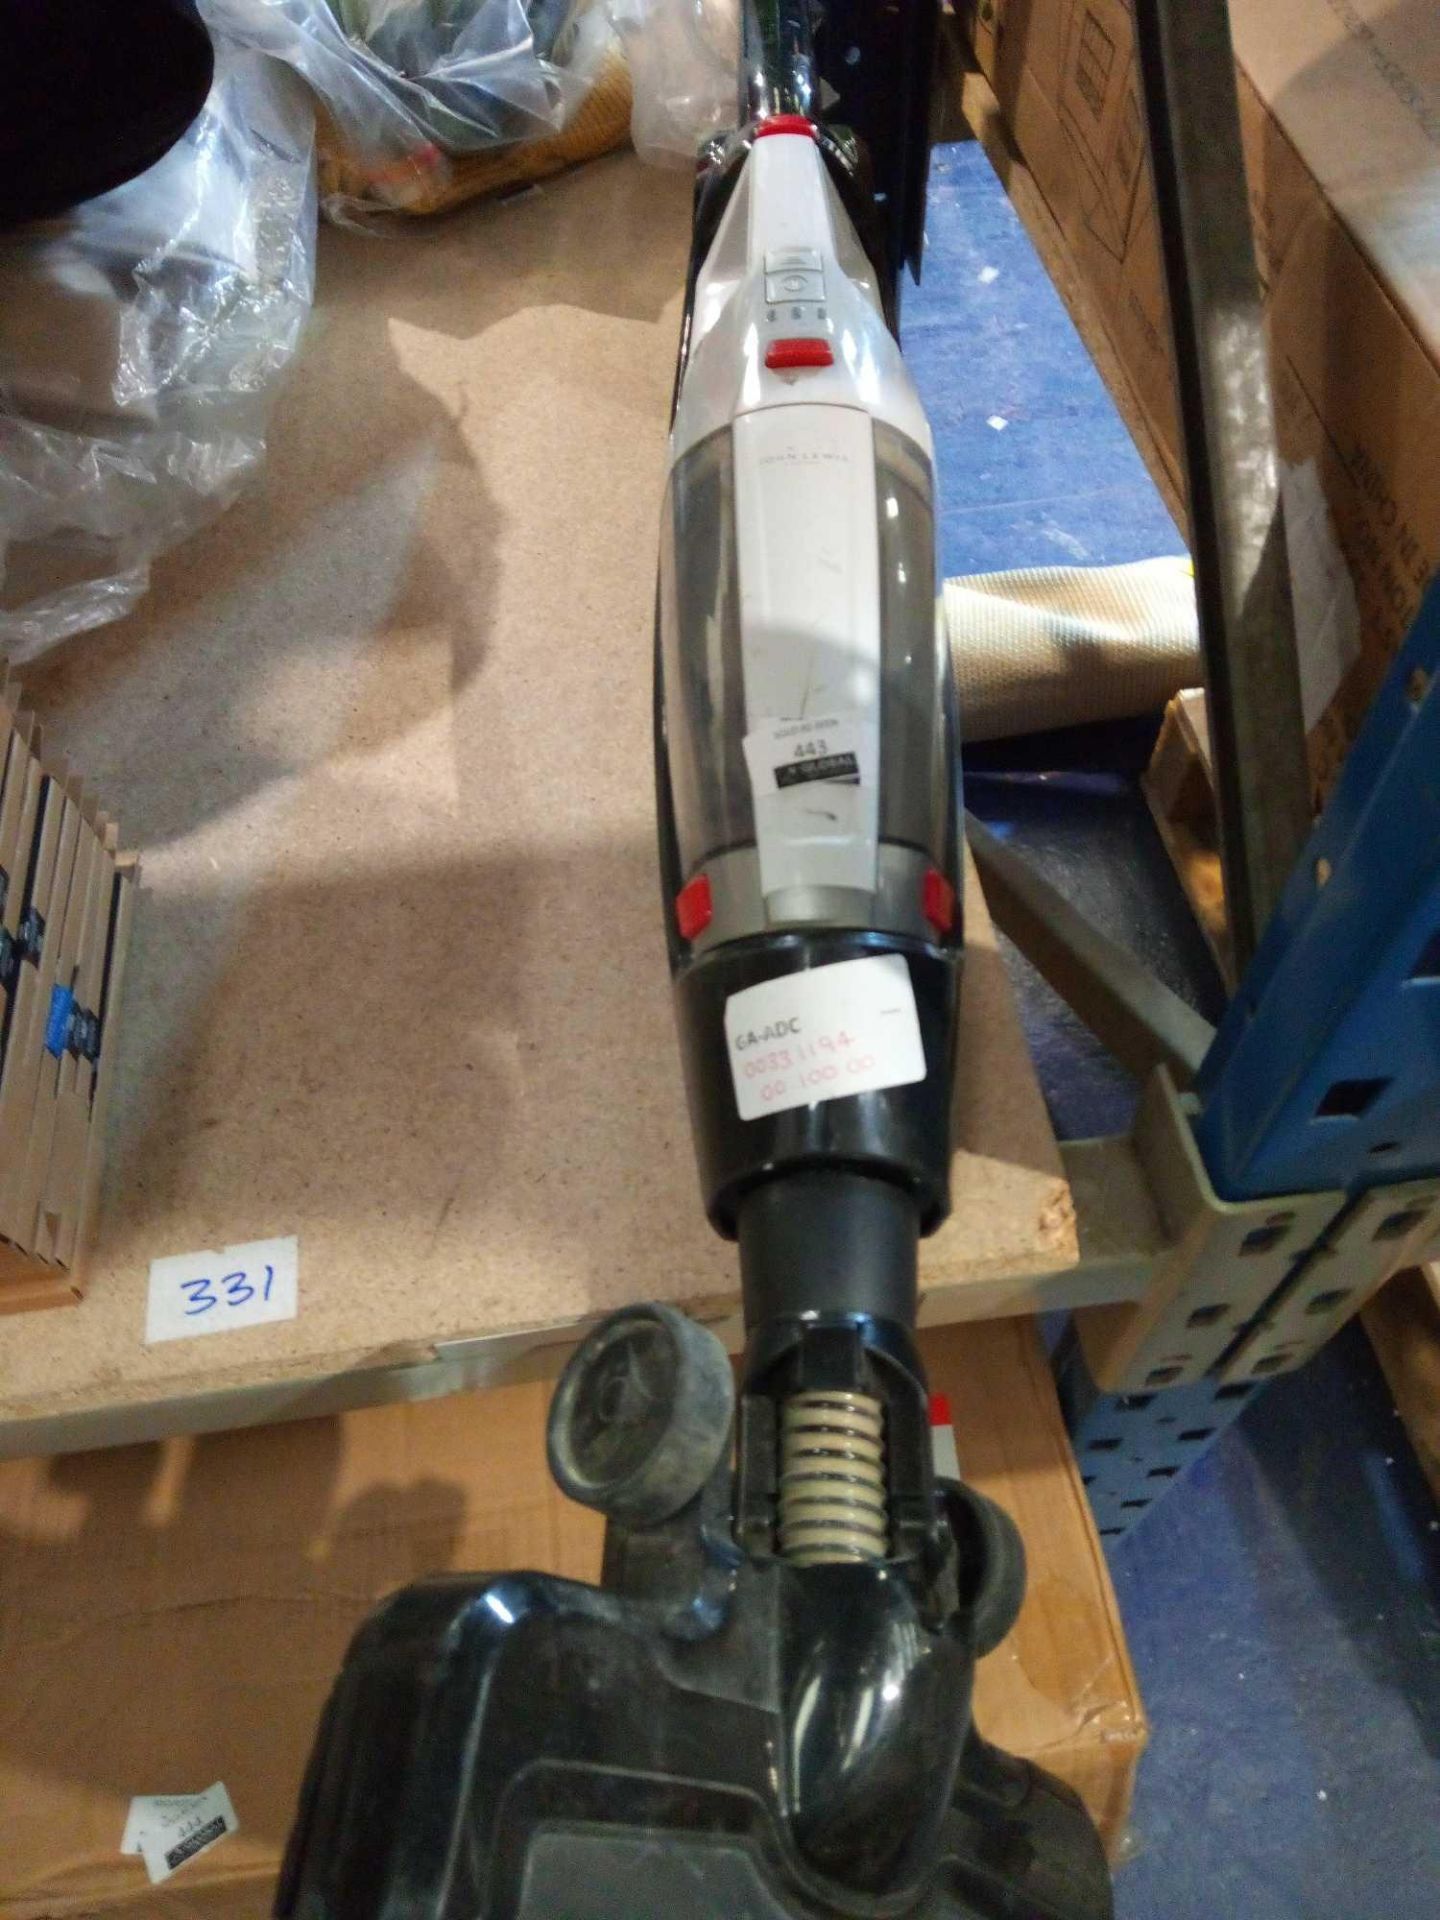 RRP £140 Lot To Contain 1X Unboxed John Lewis 2-In-1 Cordless Vacuum Cleaner (Tr) - Image 2 of 2